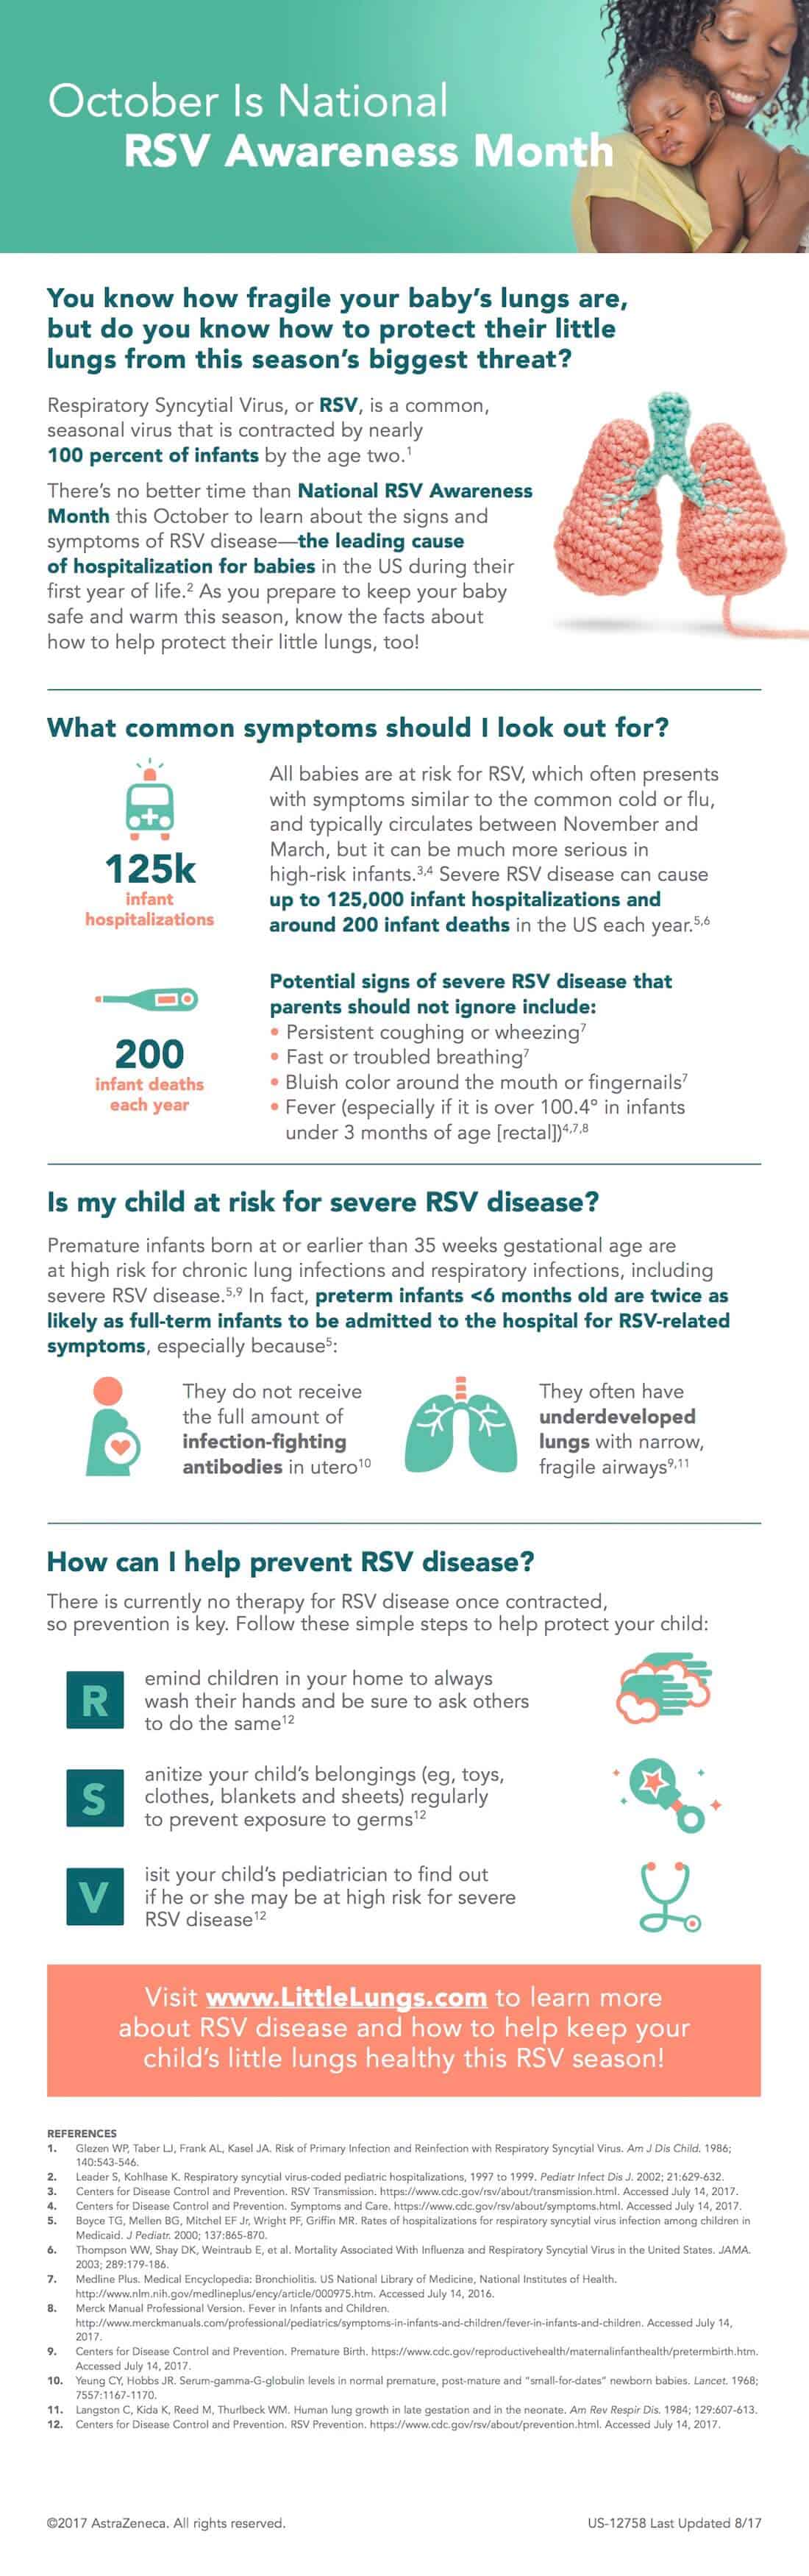 Image graphic with information on RSV.